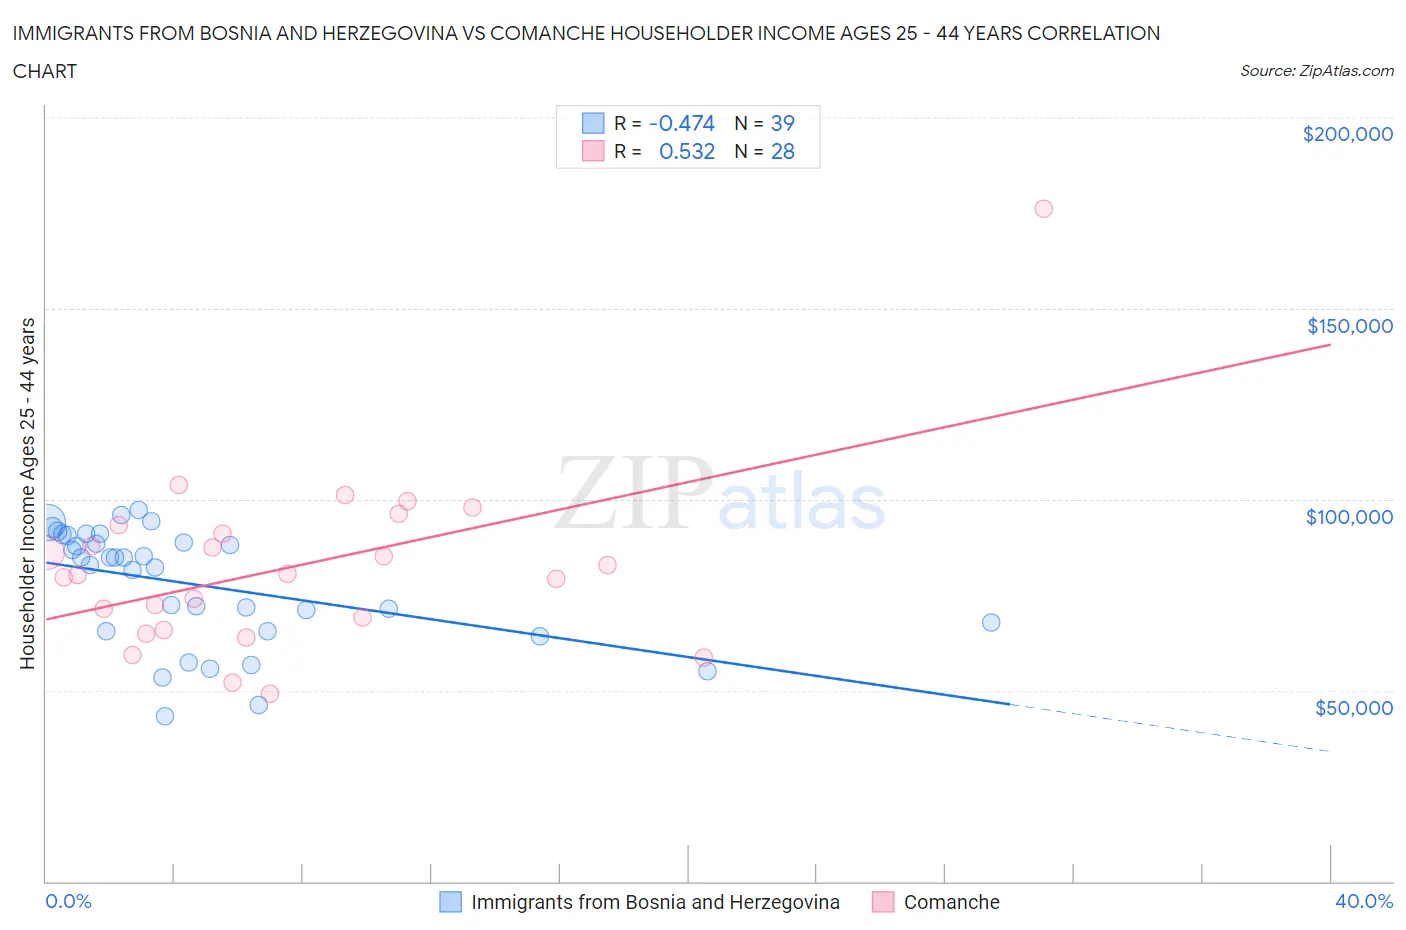 Immigrants from Bosnia and Herzegovina vs Comanche Householder Income Ages 25 - 44 years